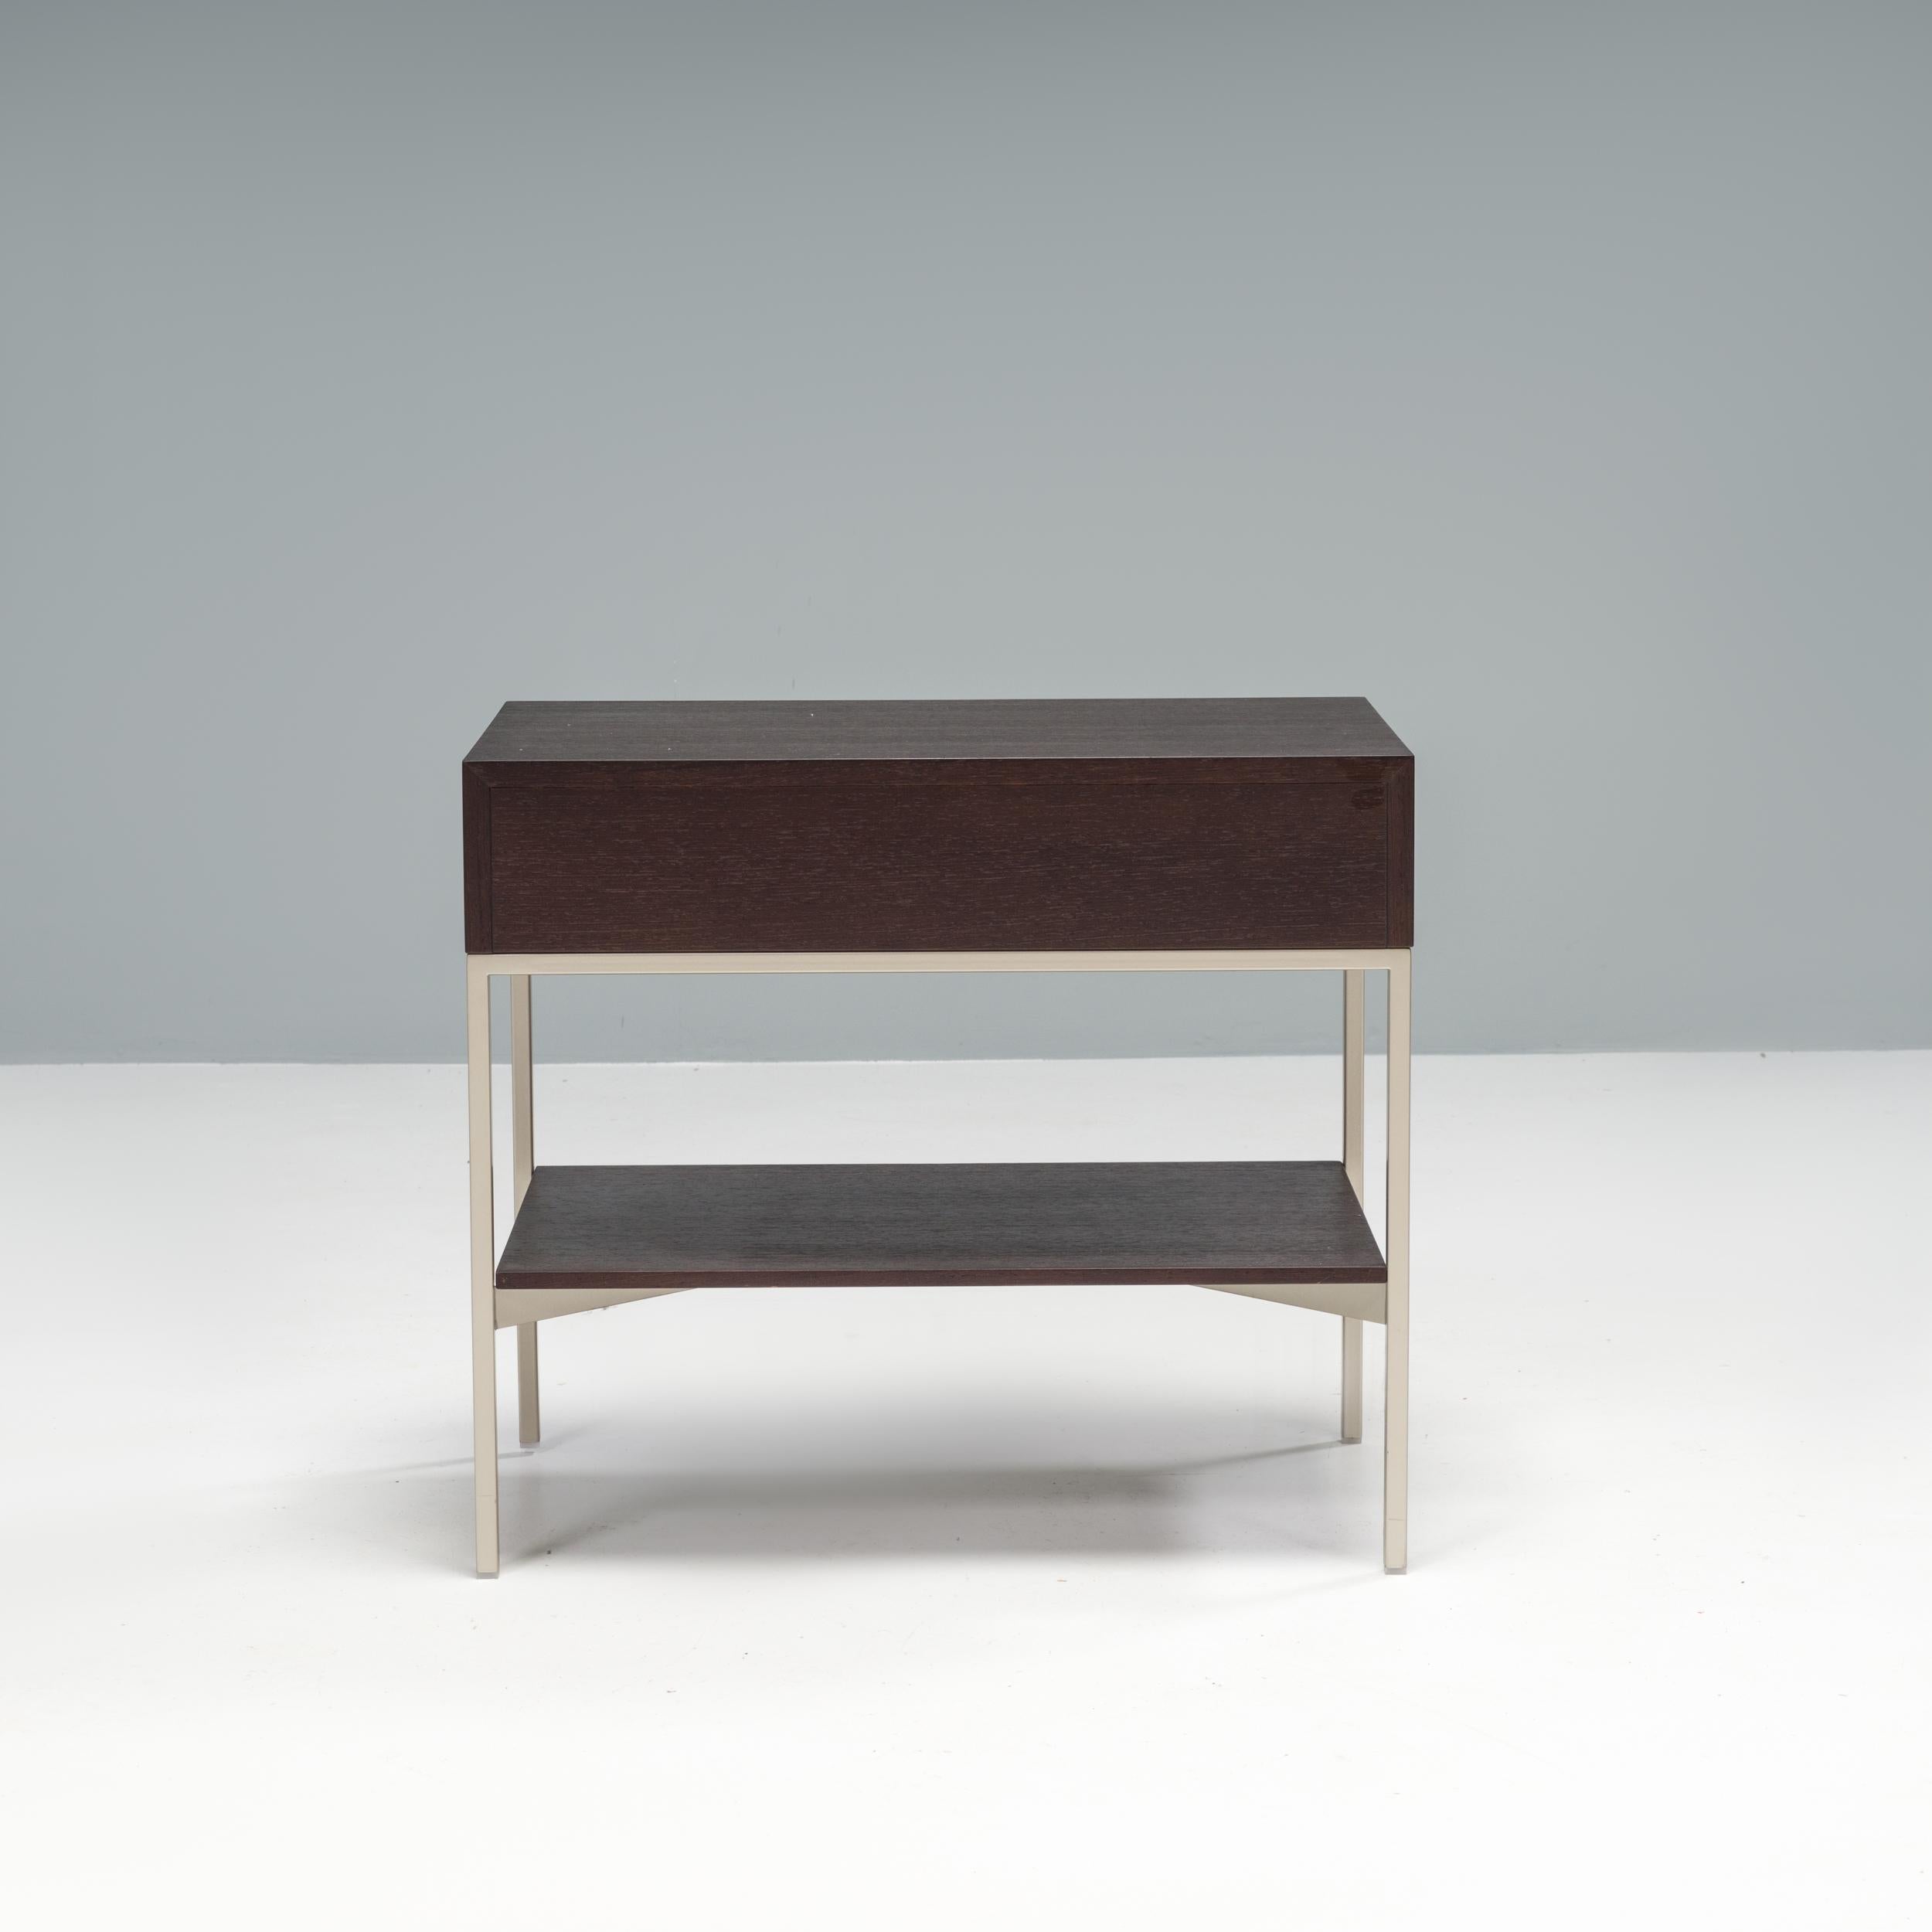 Originally designed by Antonio Citterio for Maxalto in 1996, the Ebe low table is a sleek, classic example of Italian design.

Constructed from grey oak, the compact table sits on a slimline bright chrome frame and features a single drawer unit